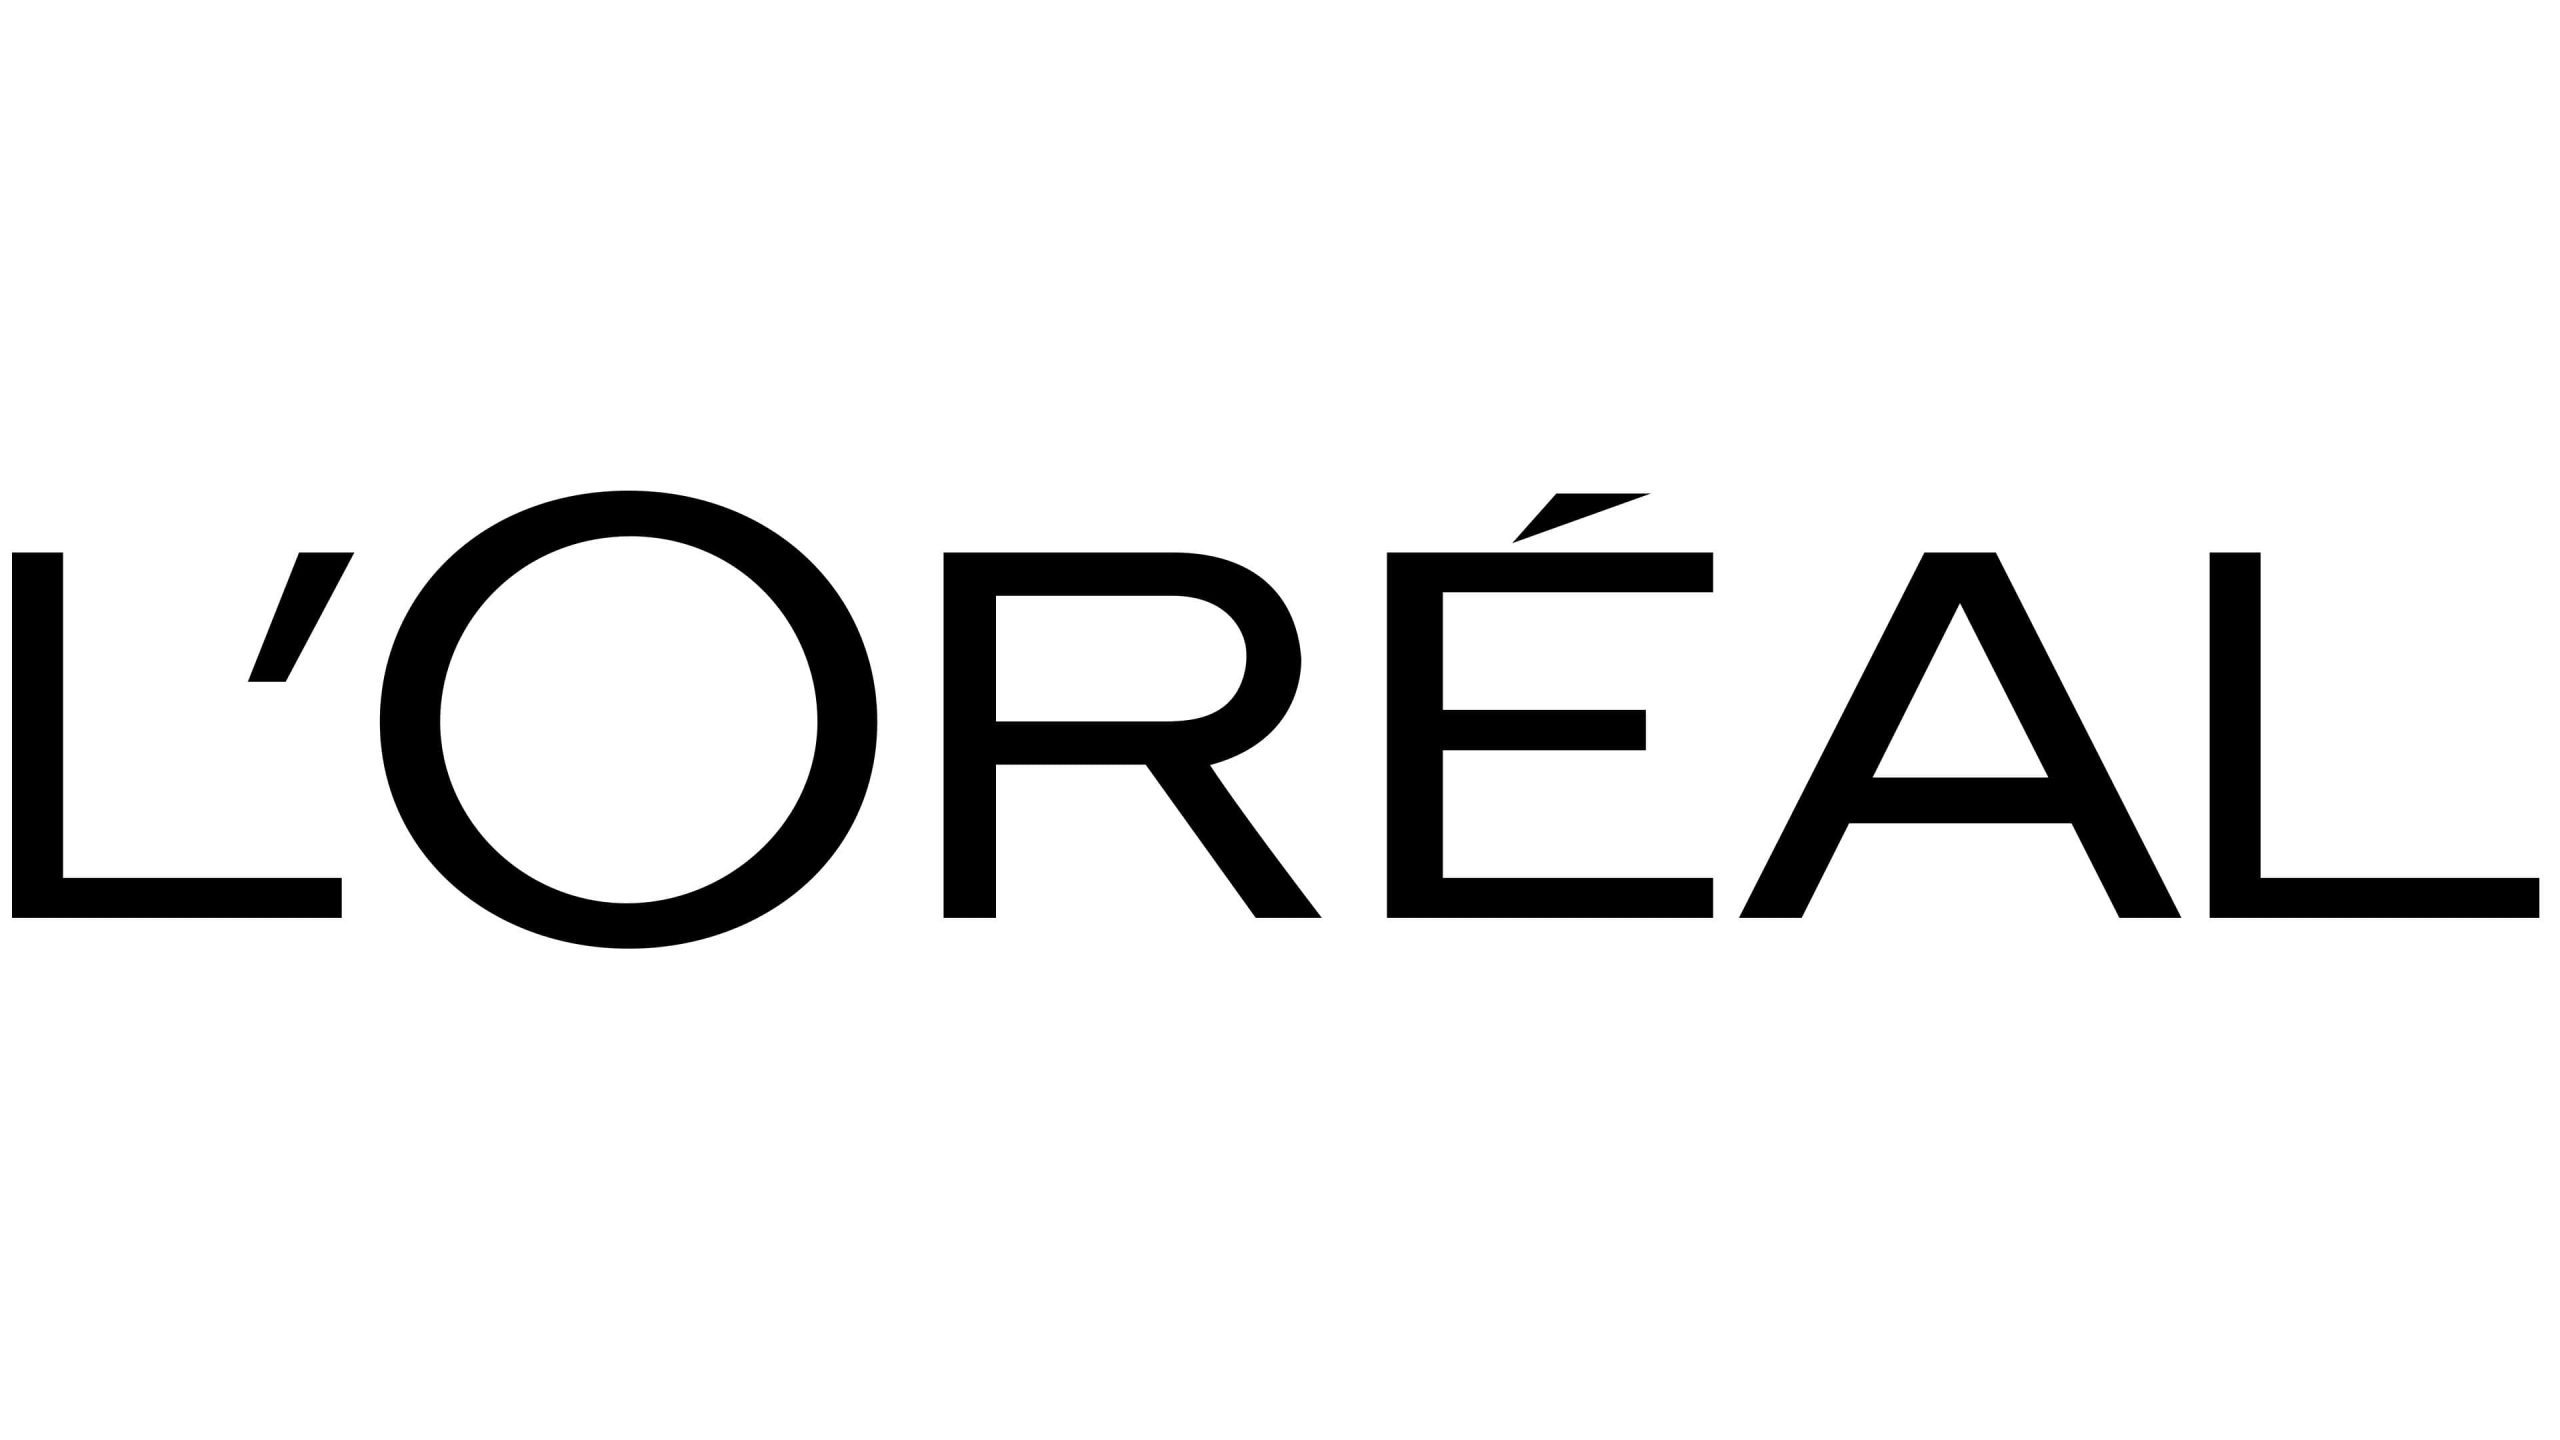 Loreal logo (opens in a new tab)